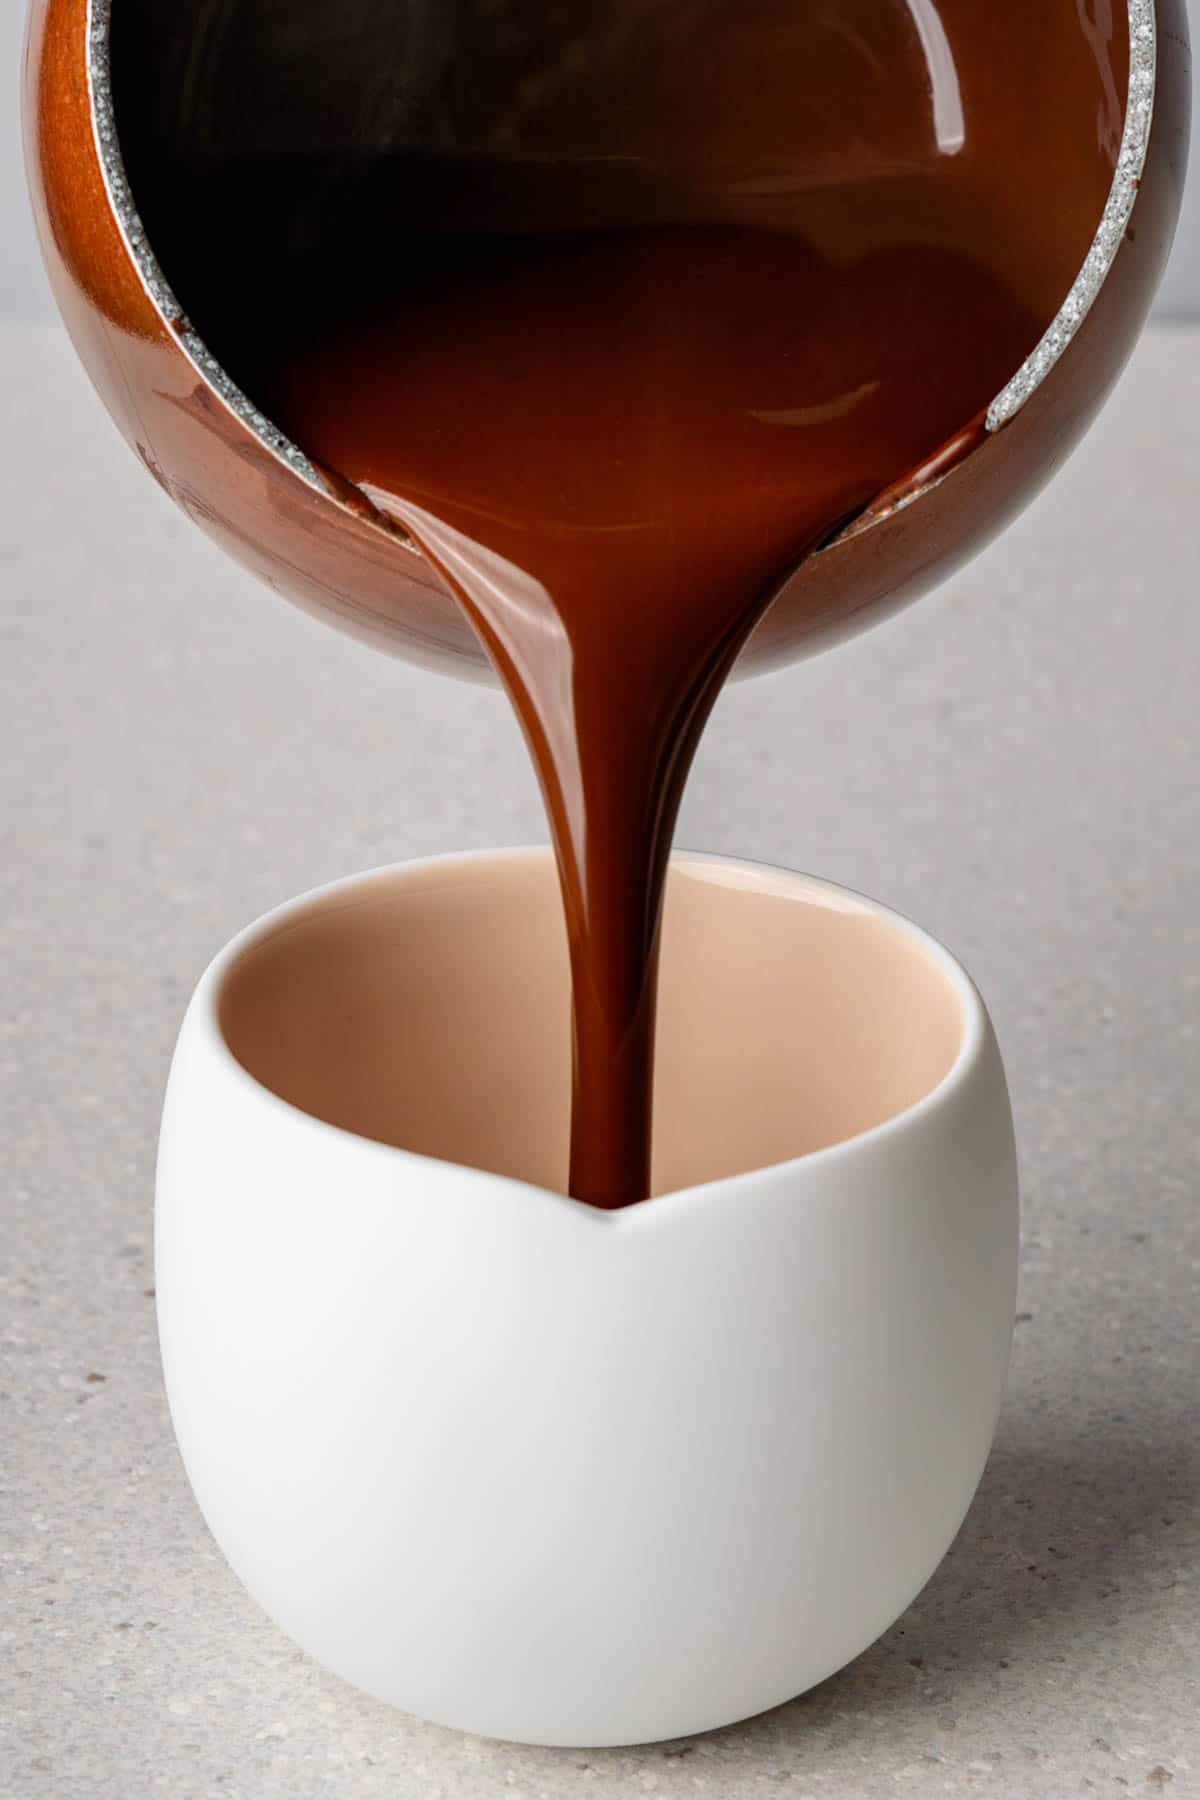 Thick hot chocolate being poured into a white mug